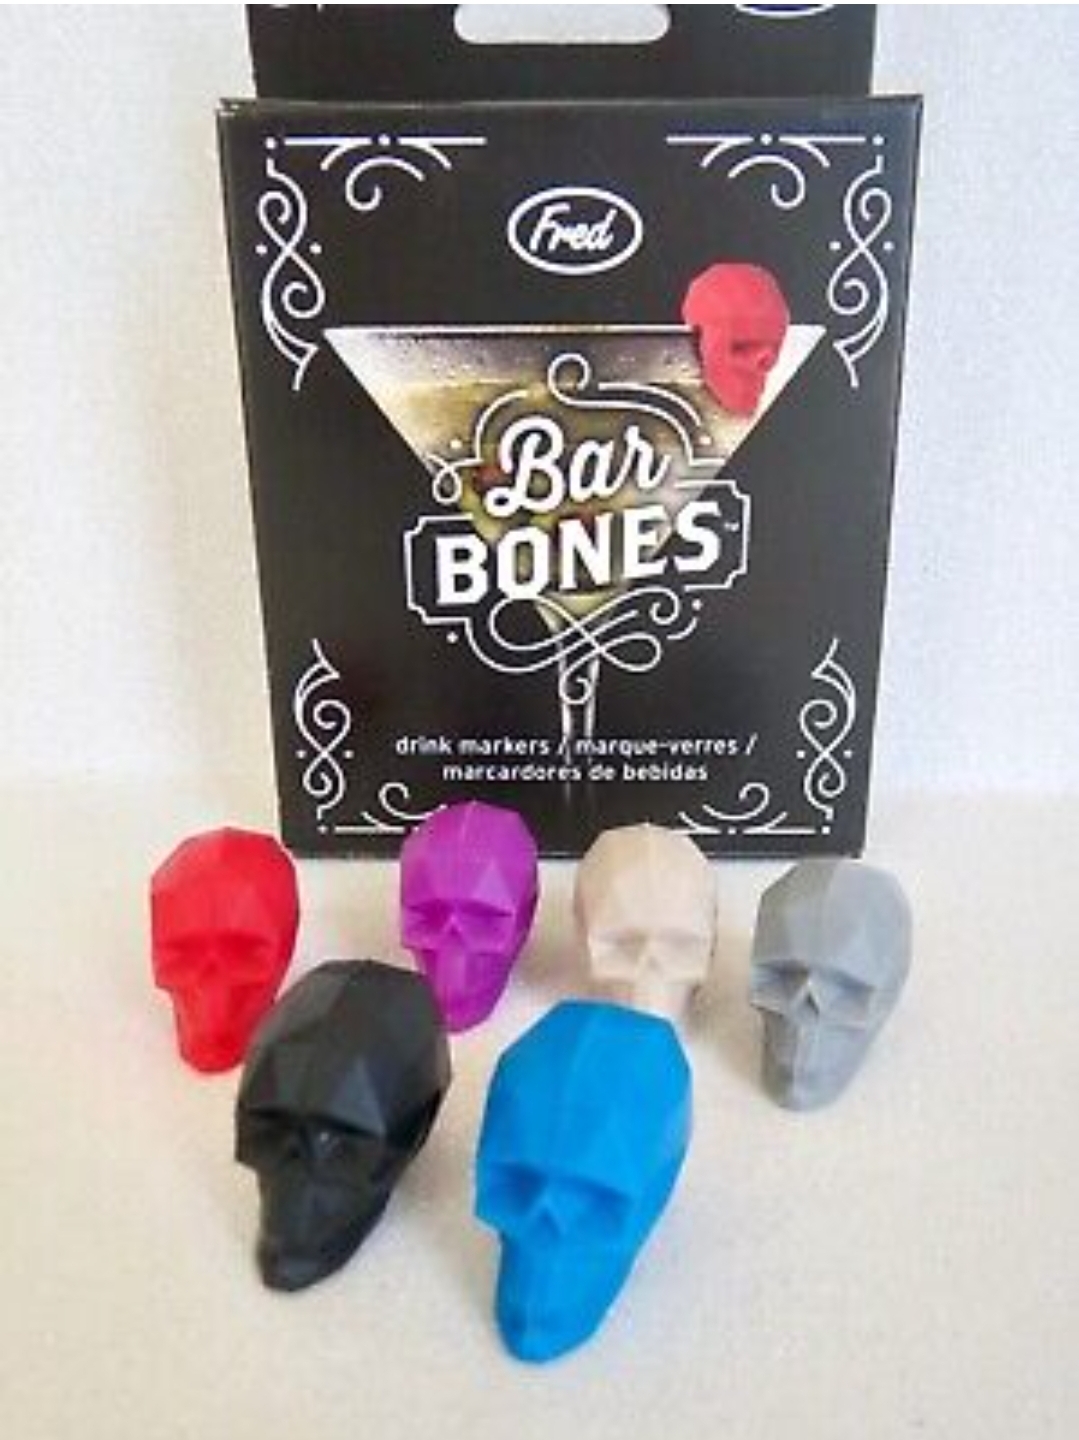 Fred BAR BONES 6 Skull Drink Decorations. The perfect addition for fun parties!